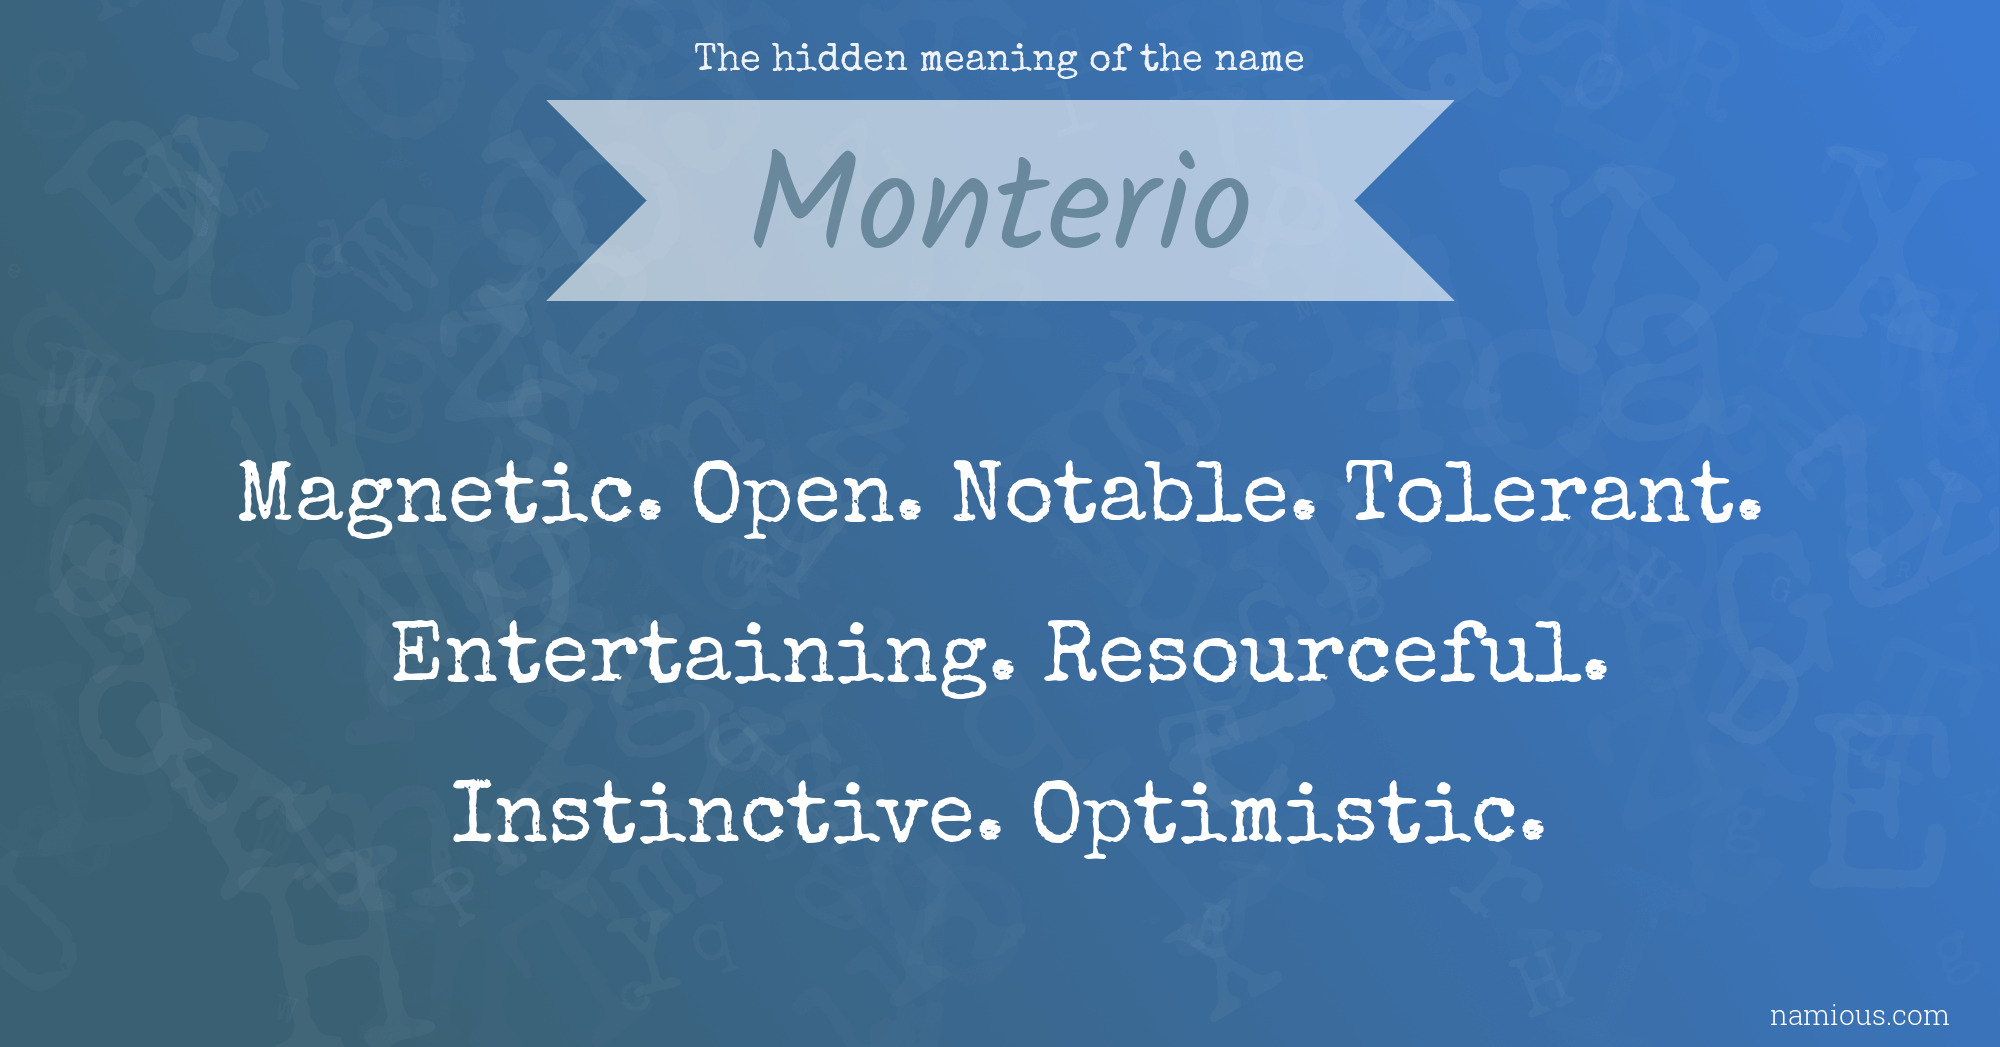 The hidden meaning of the name Monterio